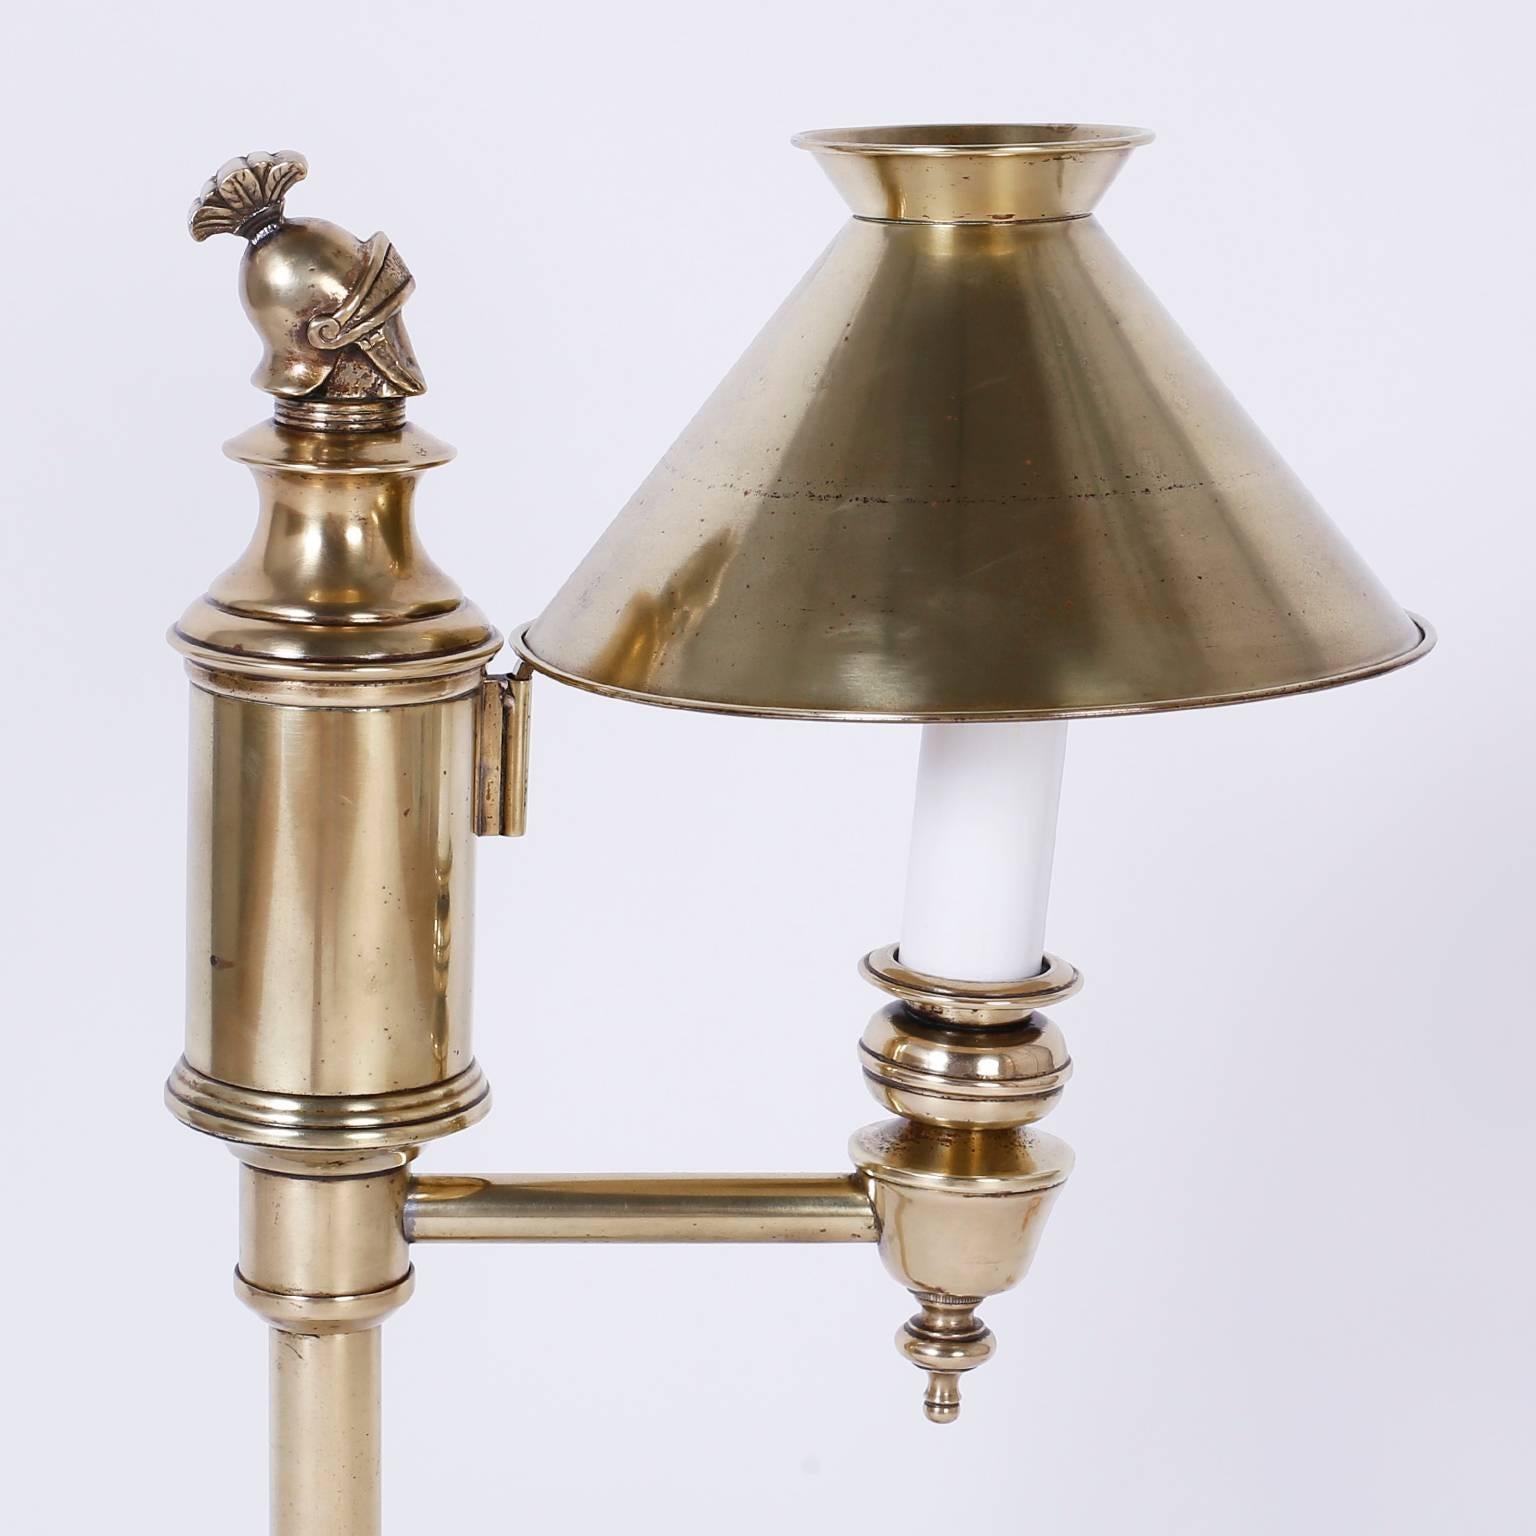 Handsome brass desk or students lamp featuring a knights helmut a top
the center post, brass shade and a Classic timeless form. Hand polished
and lacquered for easy care.